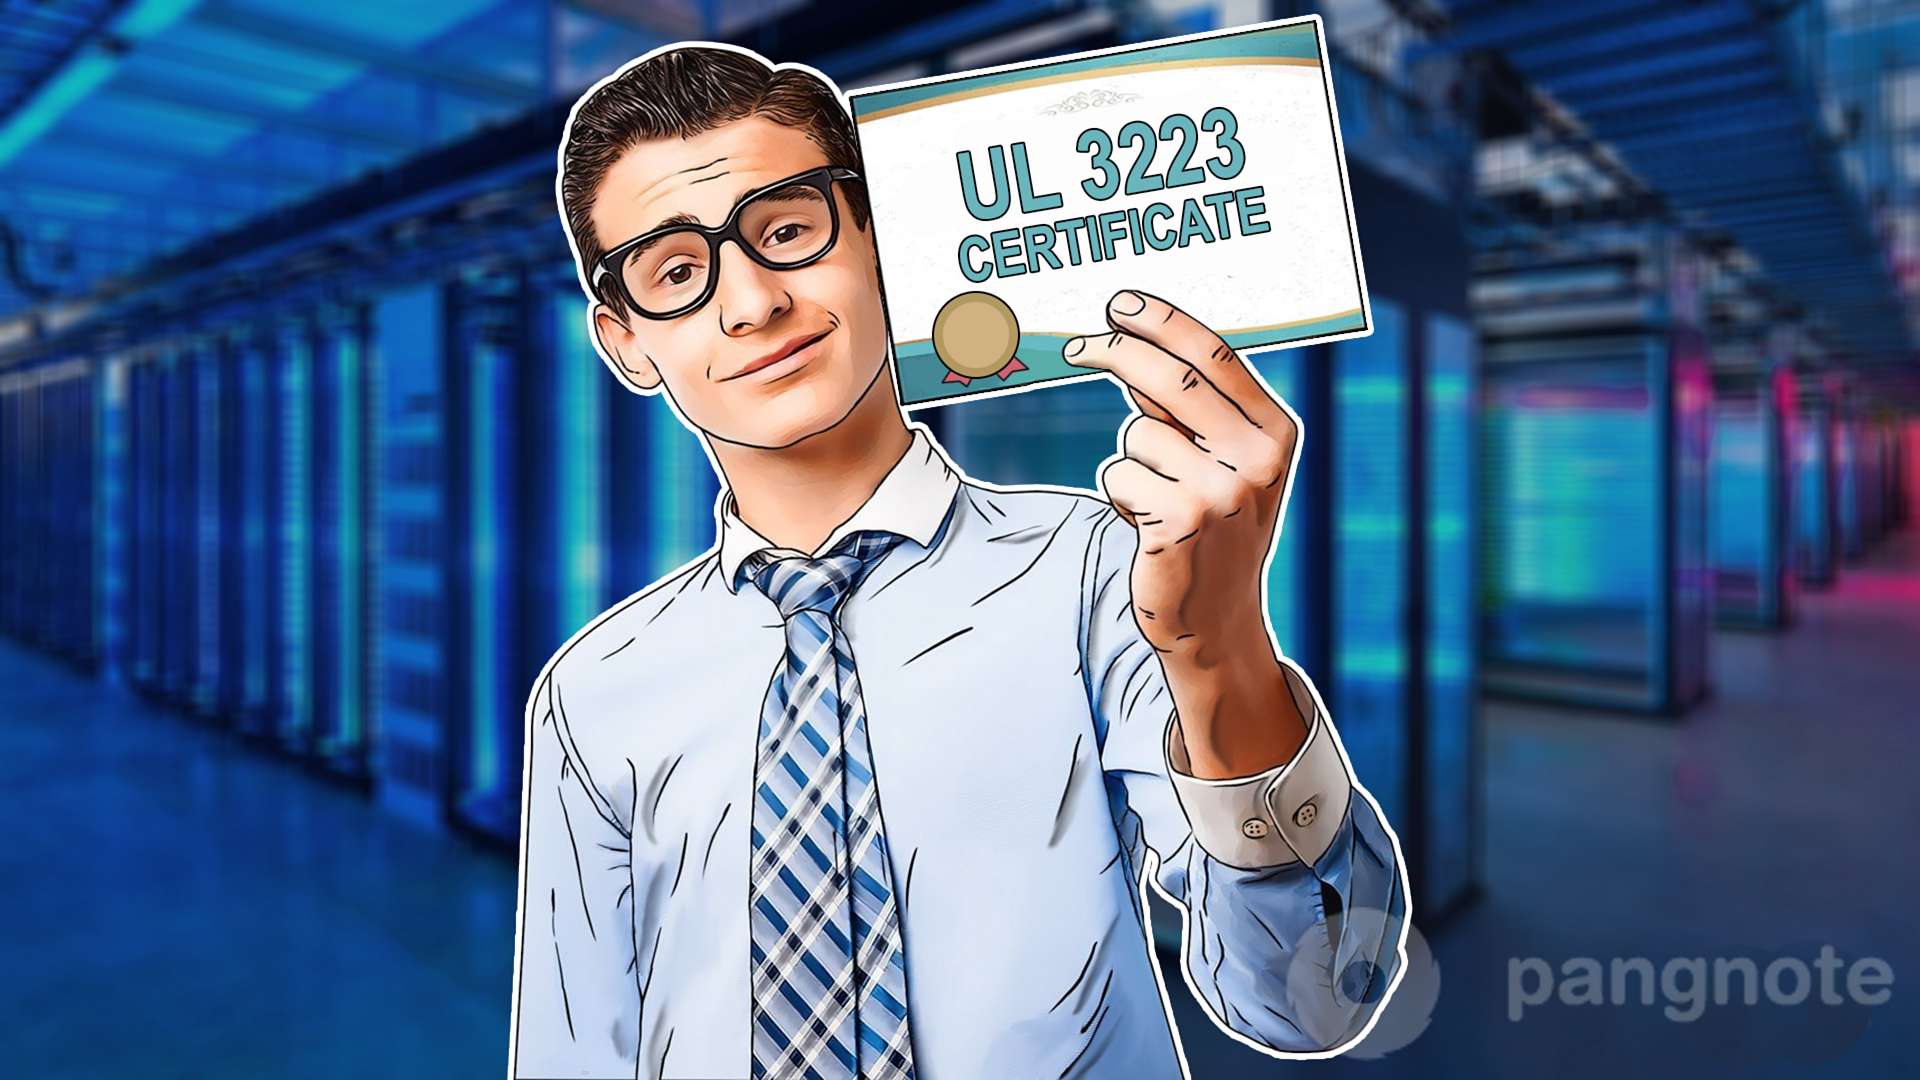 Why dedicated server hostings centers are interested in UL 3223 certificate?